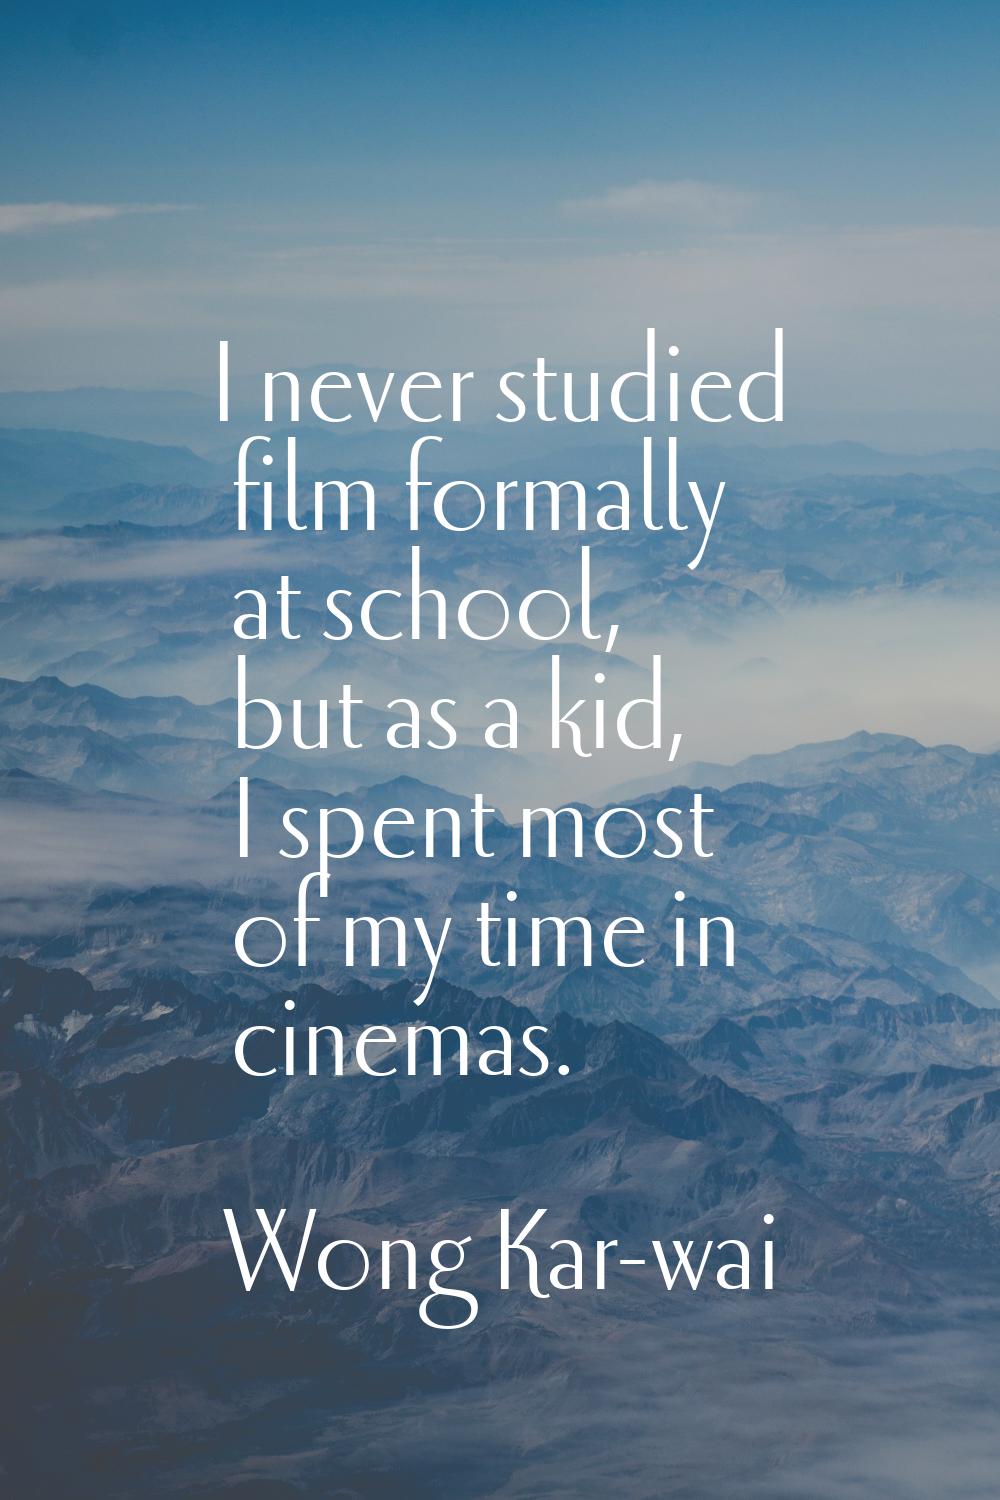 I never studied film formally at school, but as a kid, I spent most of my time in cinemas.